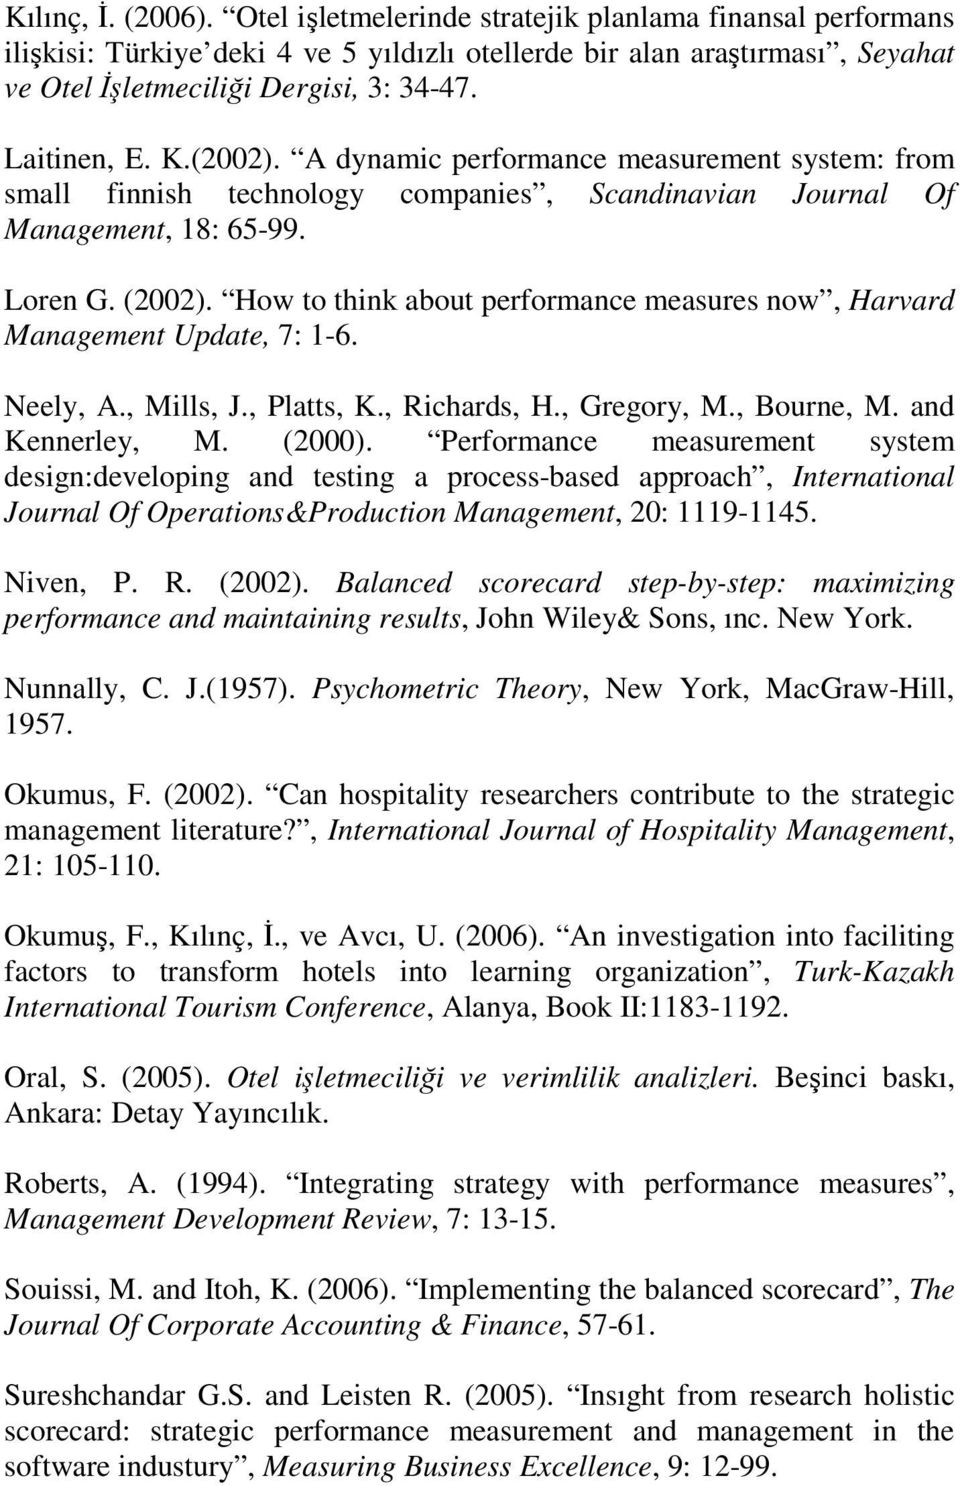 How to think about performance measures now, Harvard Management Update, 7: 1-6. Neely, A., Mills, J., Platts, K., Richards, H., Gregory, M., Bourne, M. and Kennerley, M. (2000).